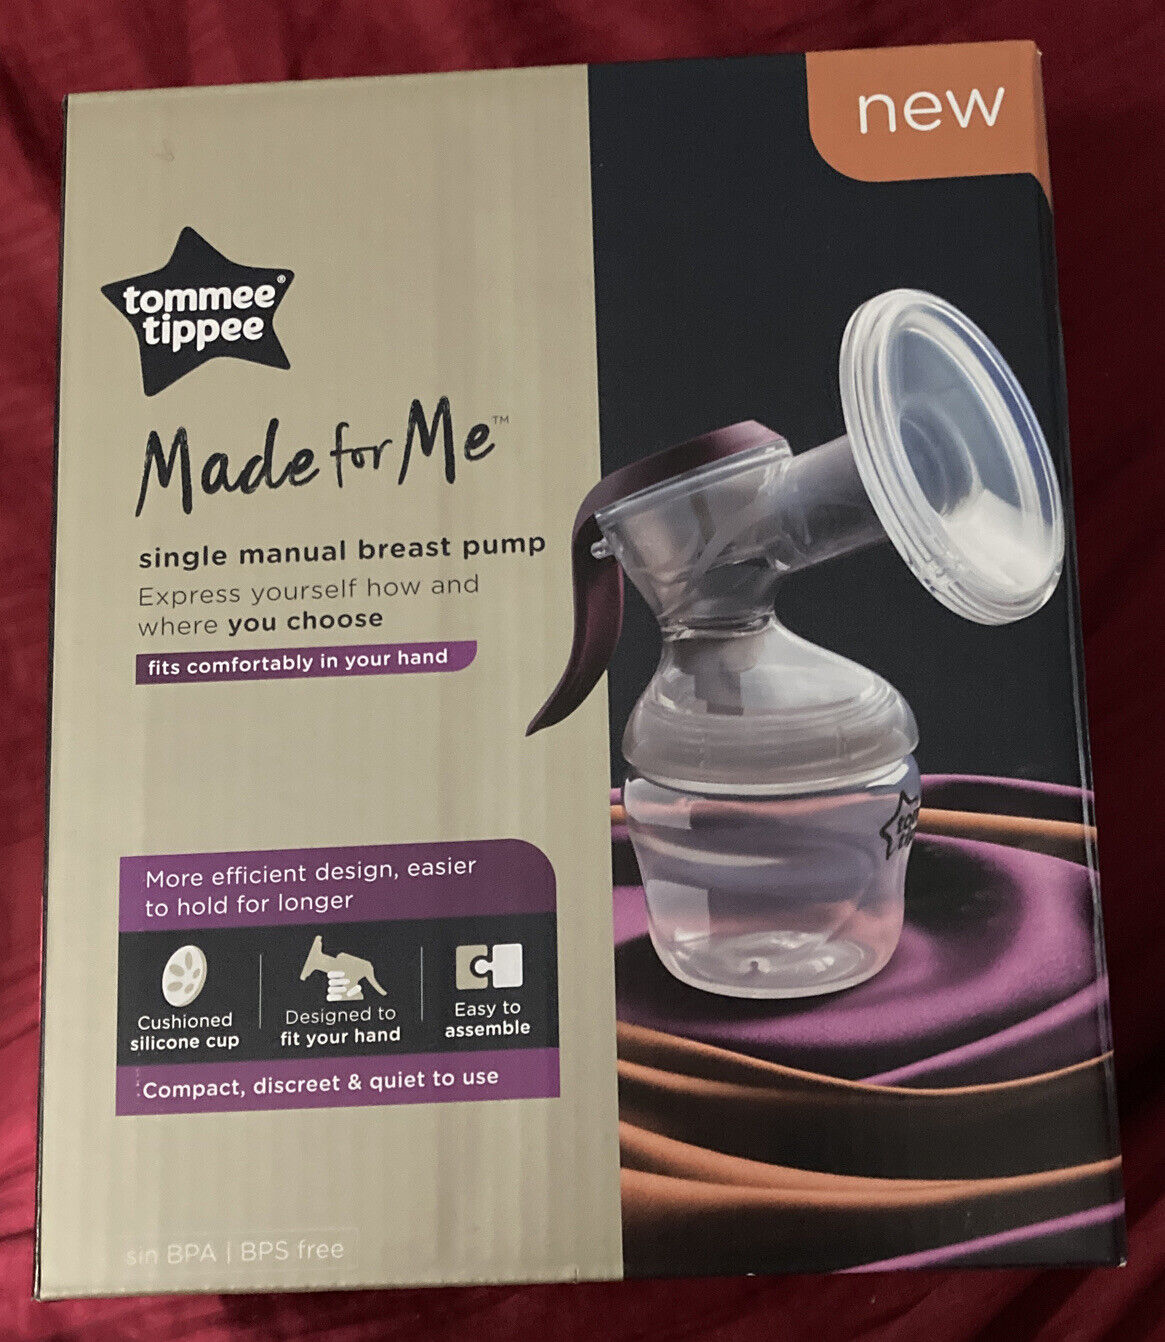 Tommee Tippee Made for Me Single Manual Breast Pump, Soft Silicone Cup New